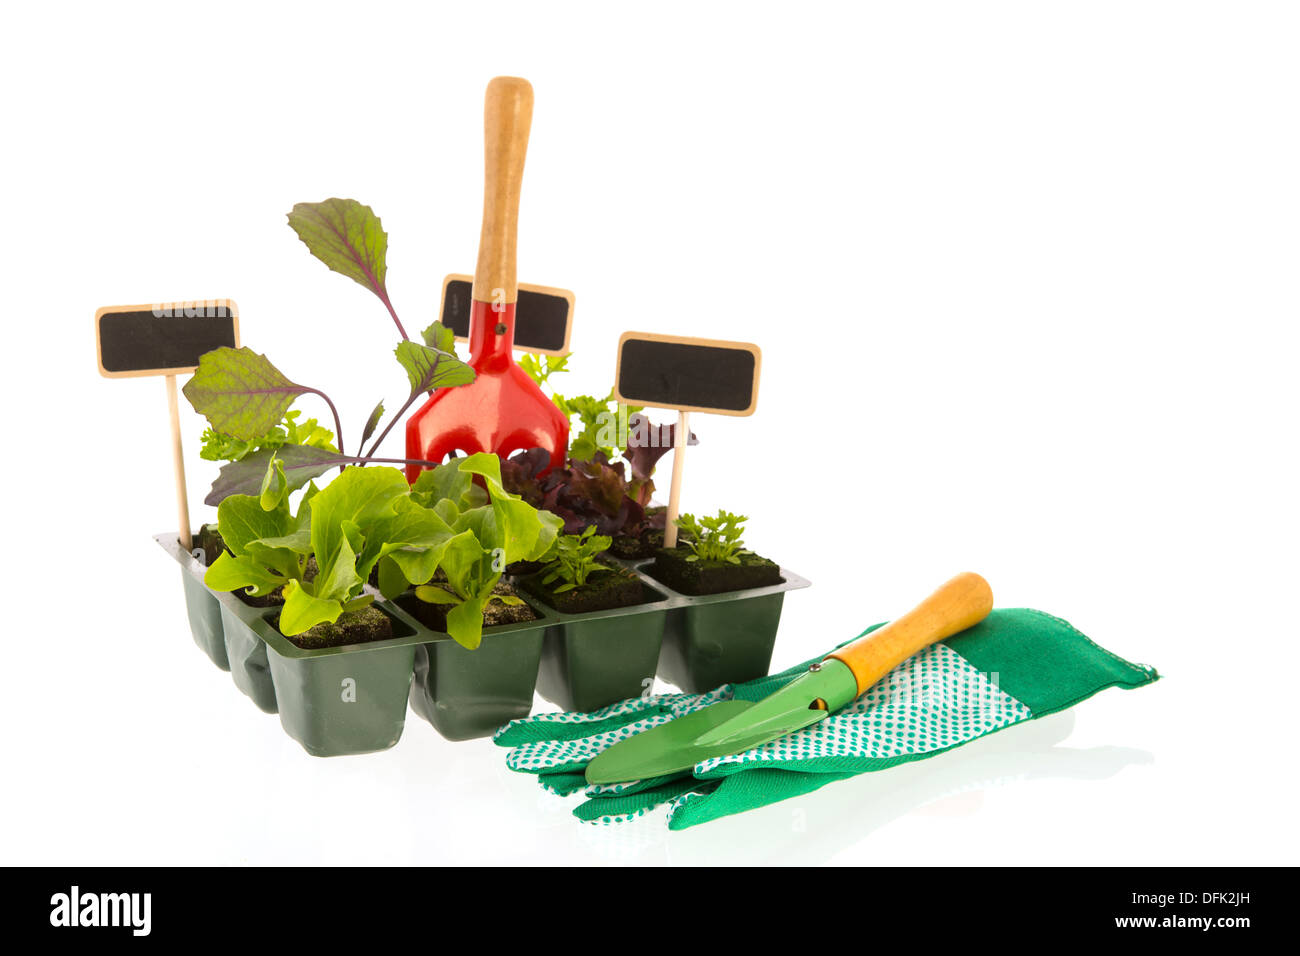 Vegetable and herb plants in plastic container Stock Photo